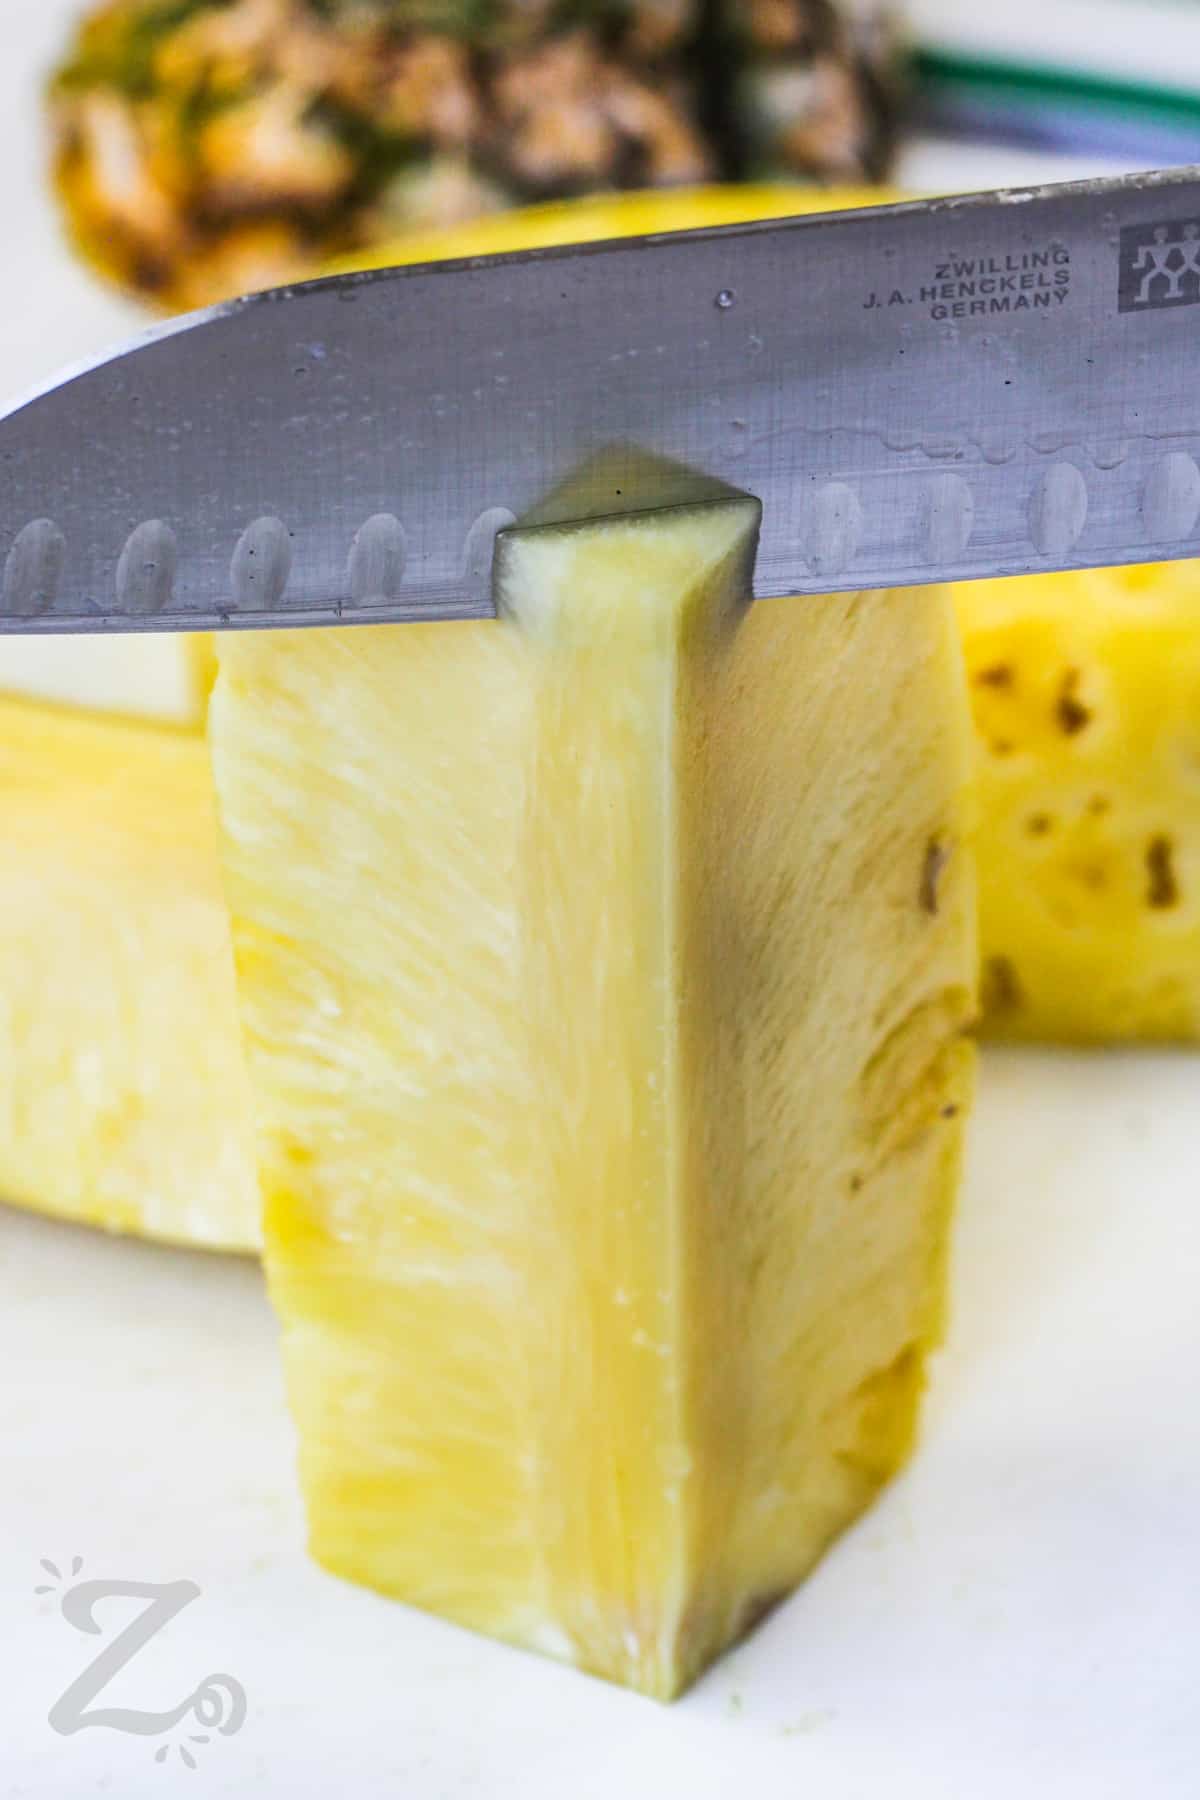 cutting off core of pineapple to make Grilled Pineapple